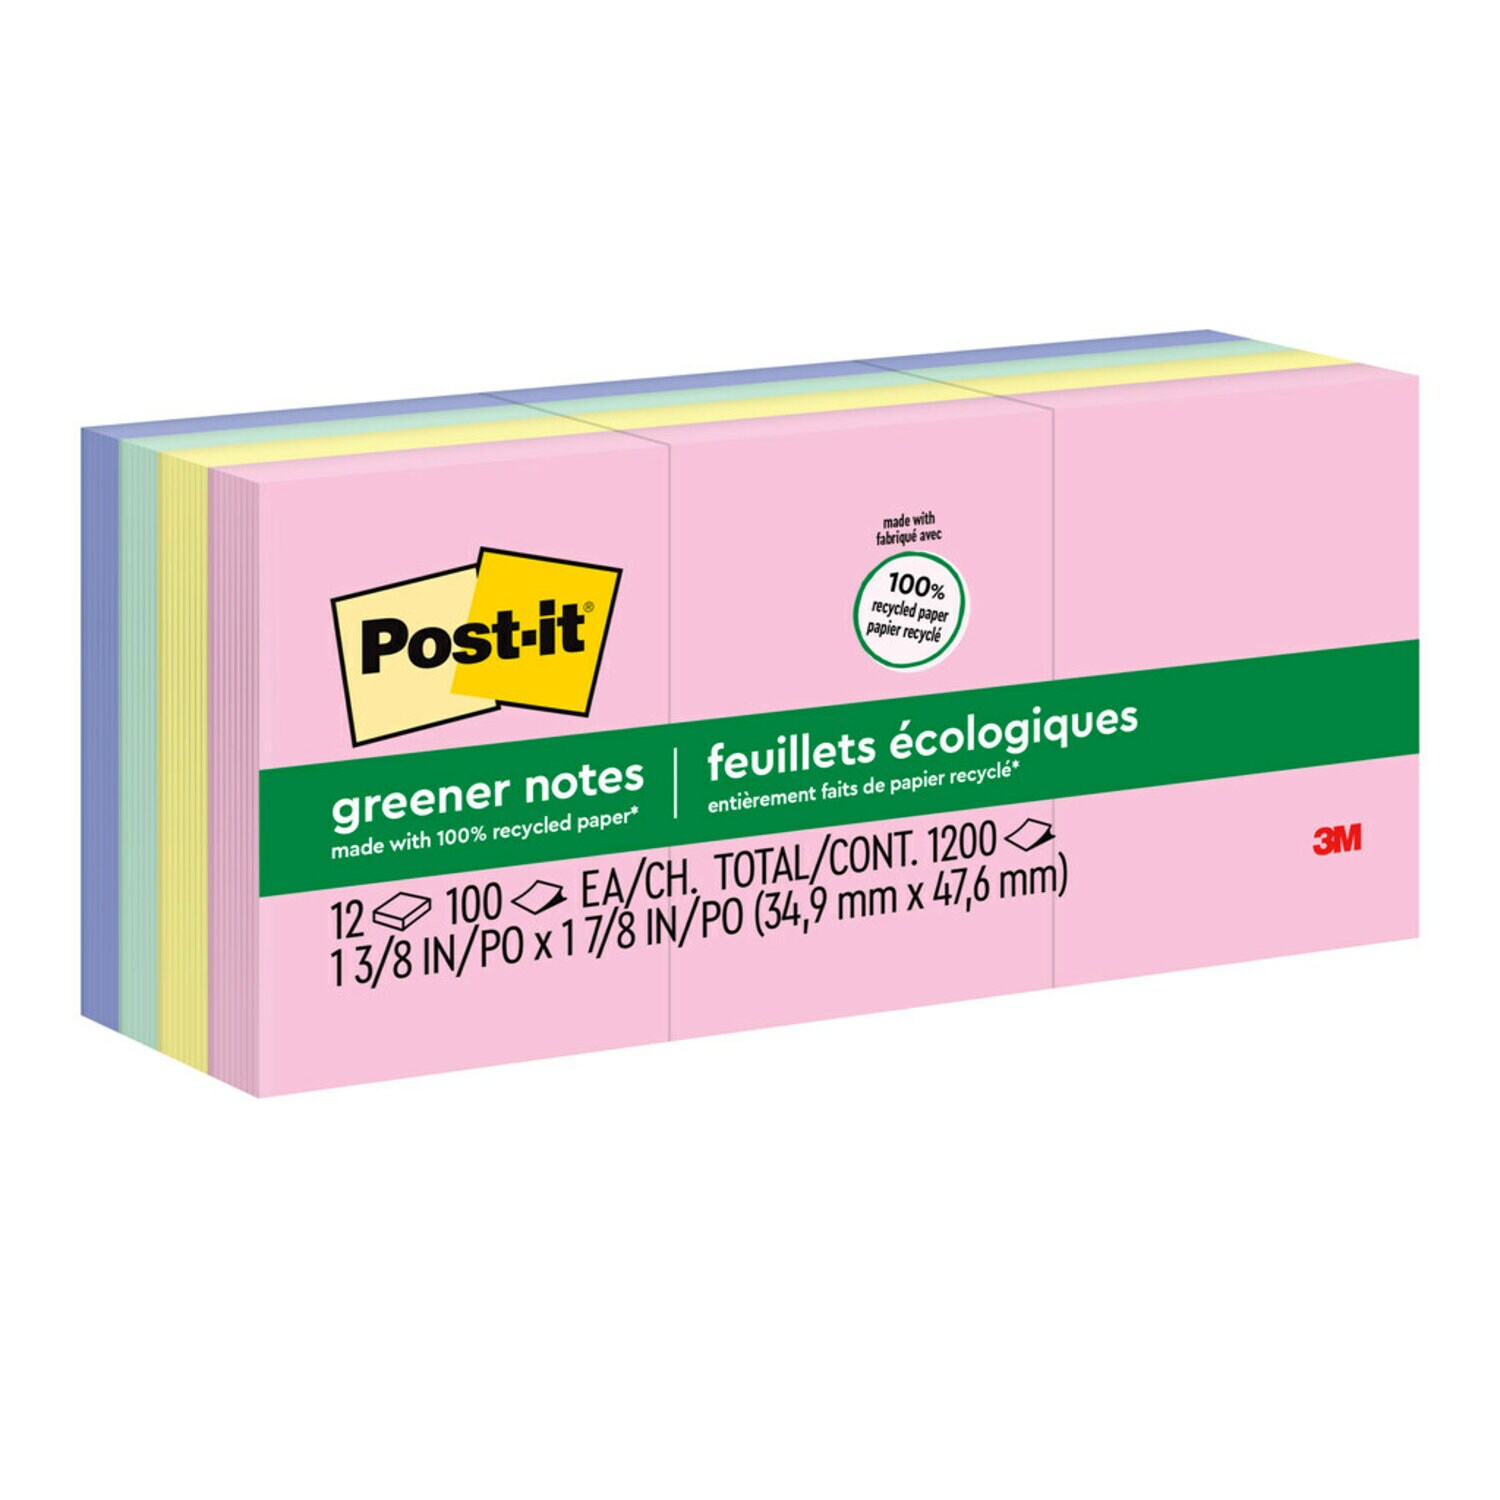 7100230104 - Post-it Greener Notes 653-RP-A, 1 3/8 in x 1 7/8 in (34.9 mm x 47.6 mm), Helsinki colors